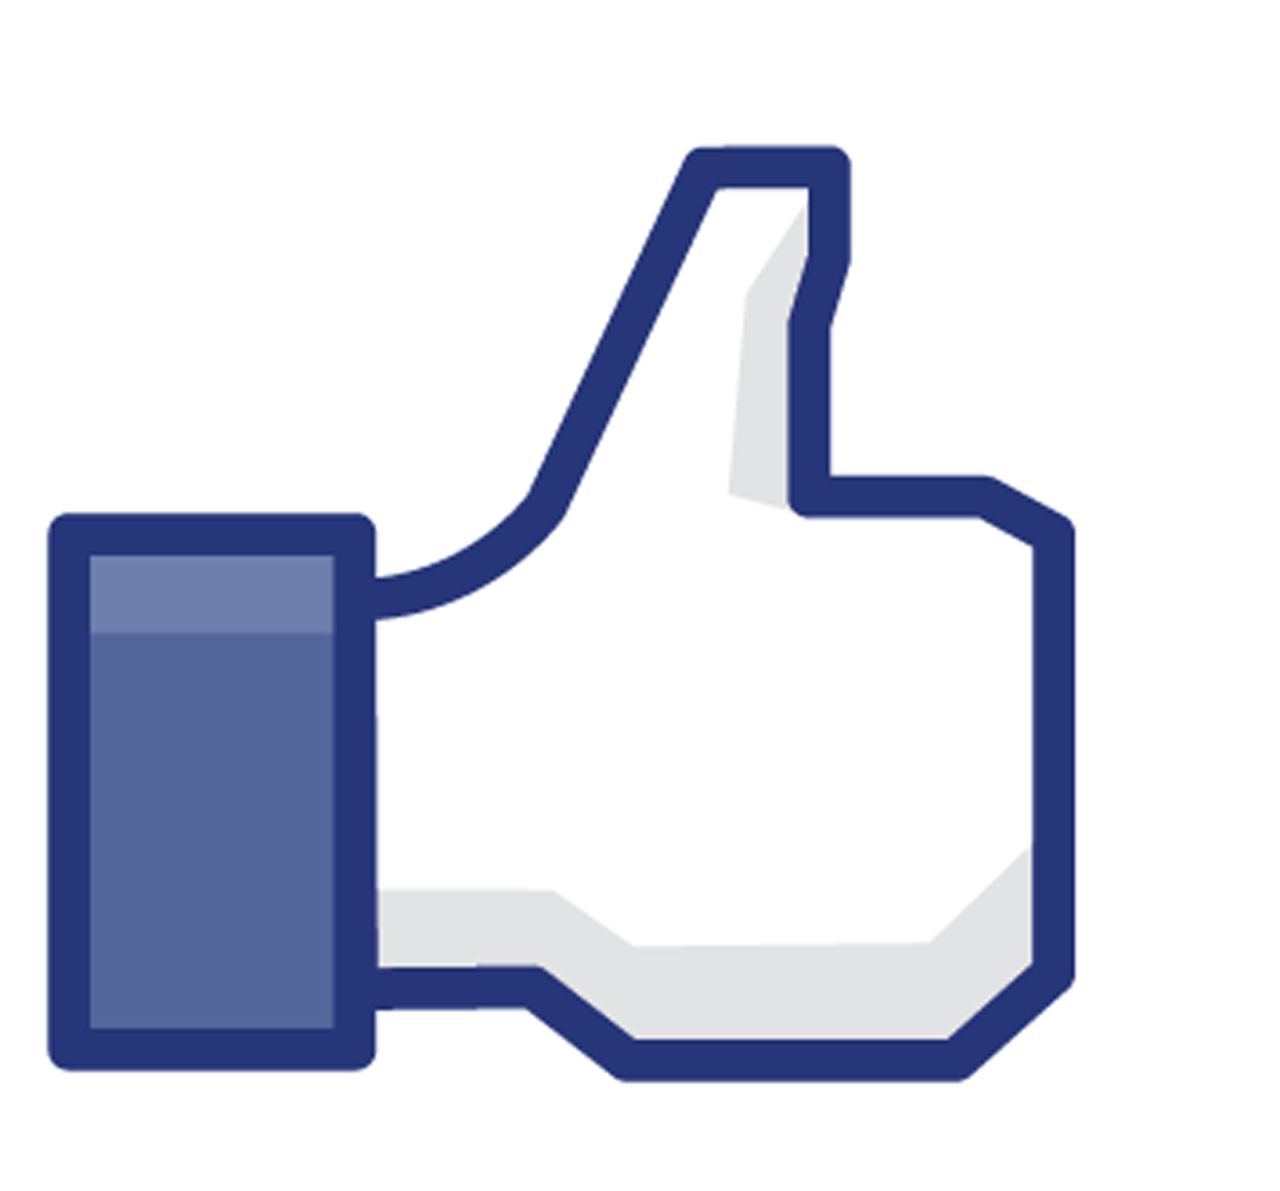 The "Like" button was introduced on Facebook in 2009, letting users show appreciation for clever status updates or pictures of their friends' cats getting into shenanigans. Cynical users demanded a "Dislike" button. Facebook also launched Pages to let fans follow celebrities, sports teams or causes.